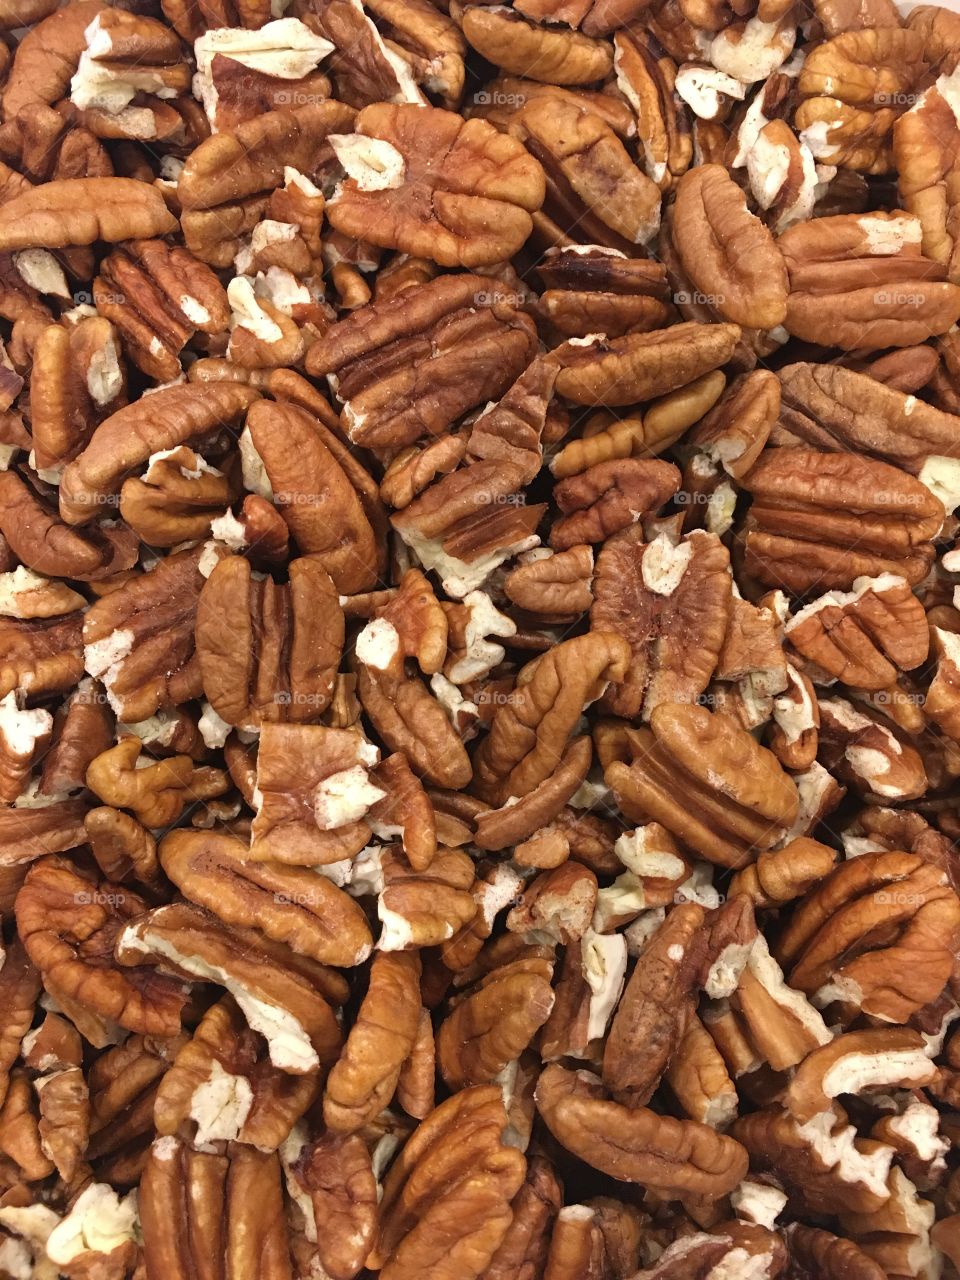 Lots of nuts! 